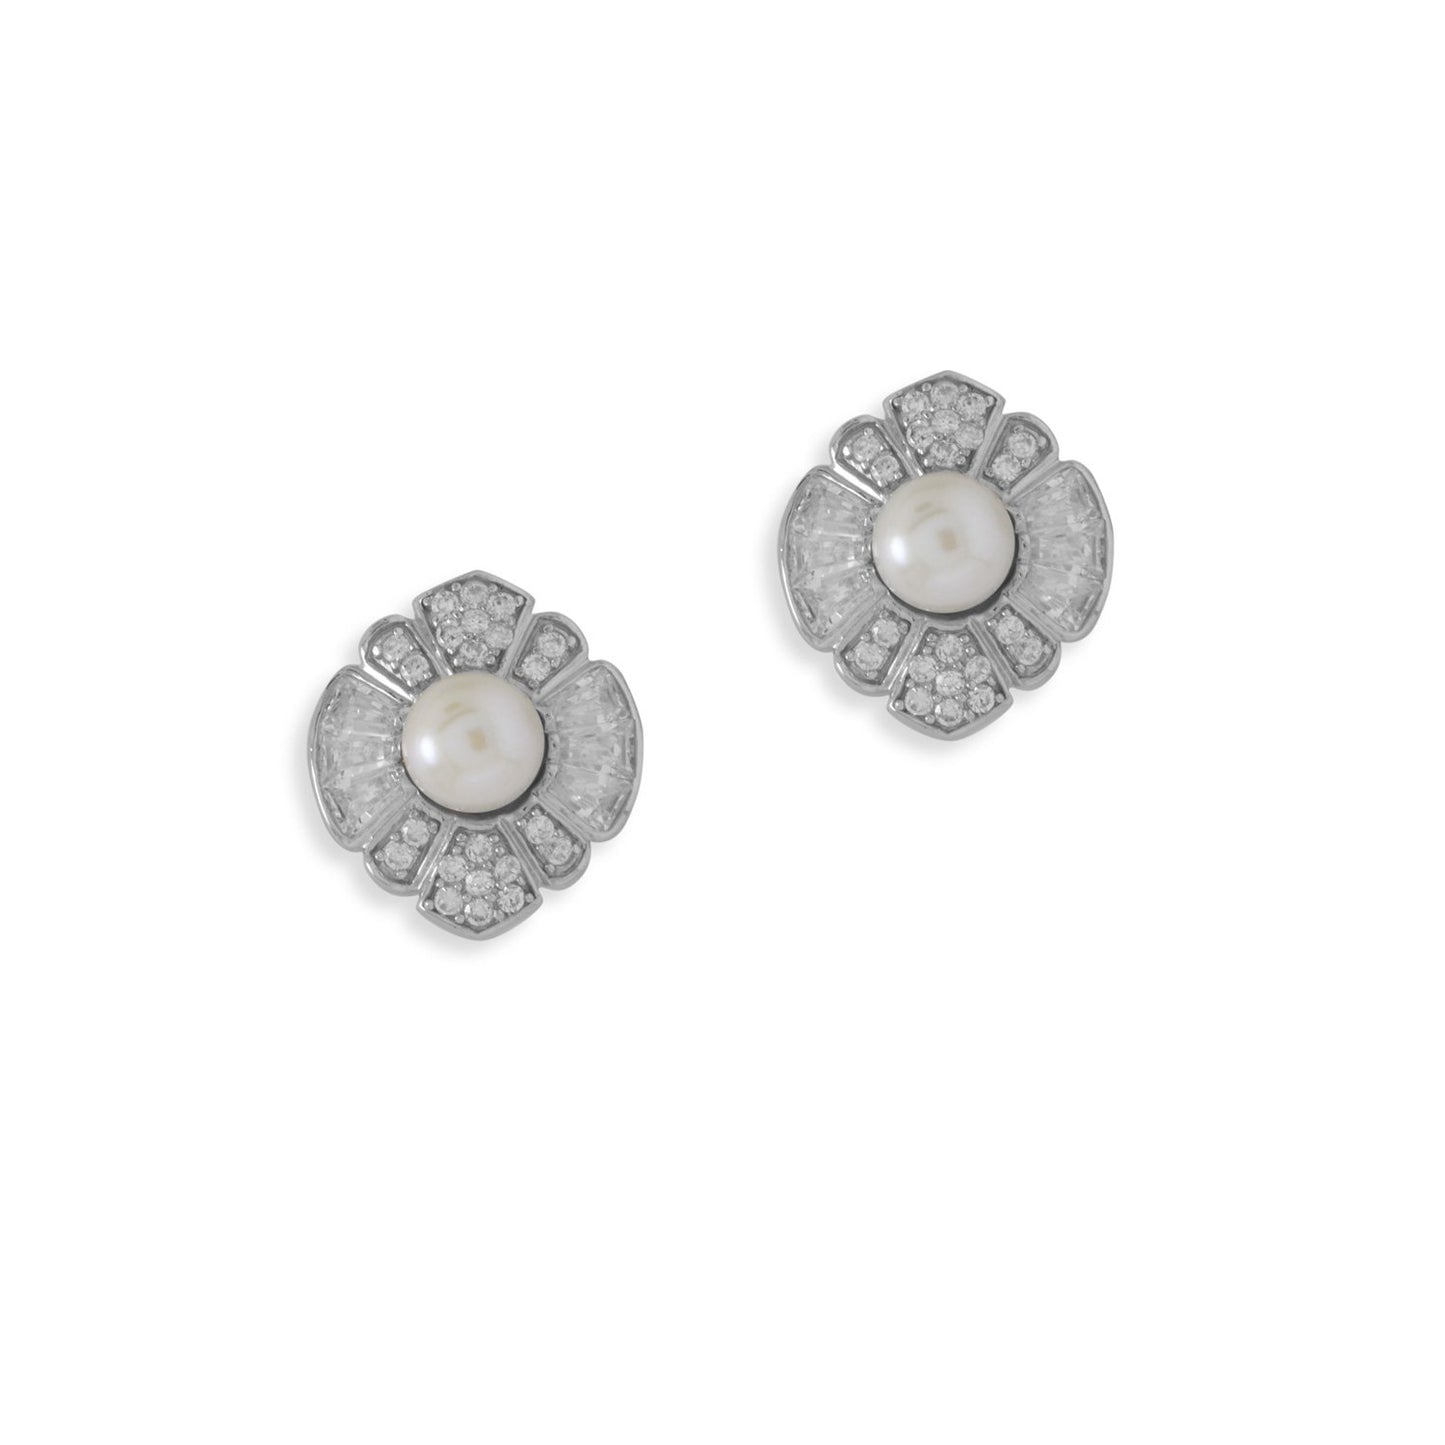 Rhodium Plated Silver Cubic Zirconia and Cultured Freshwater Pearl Flower Earrings